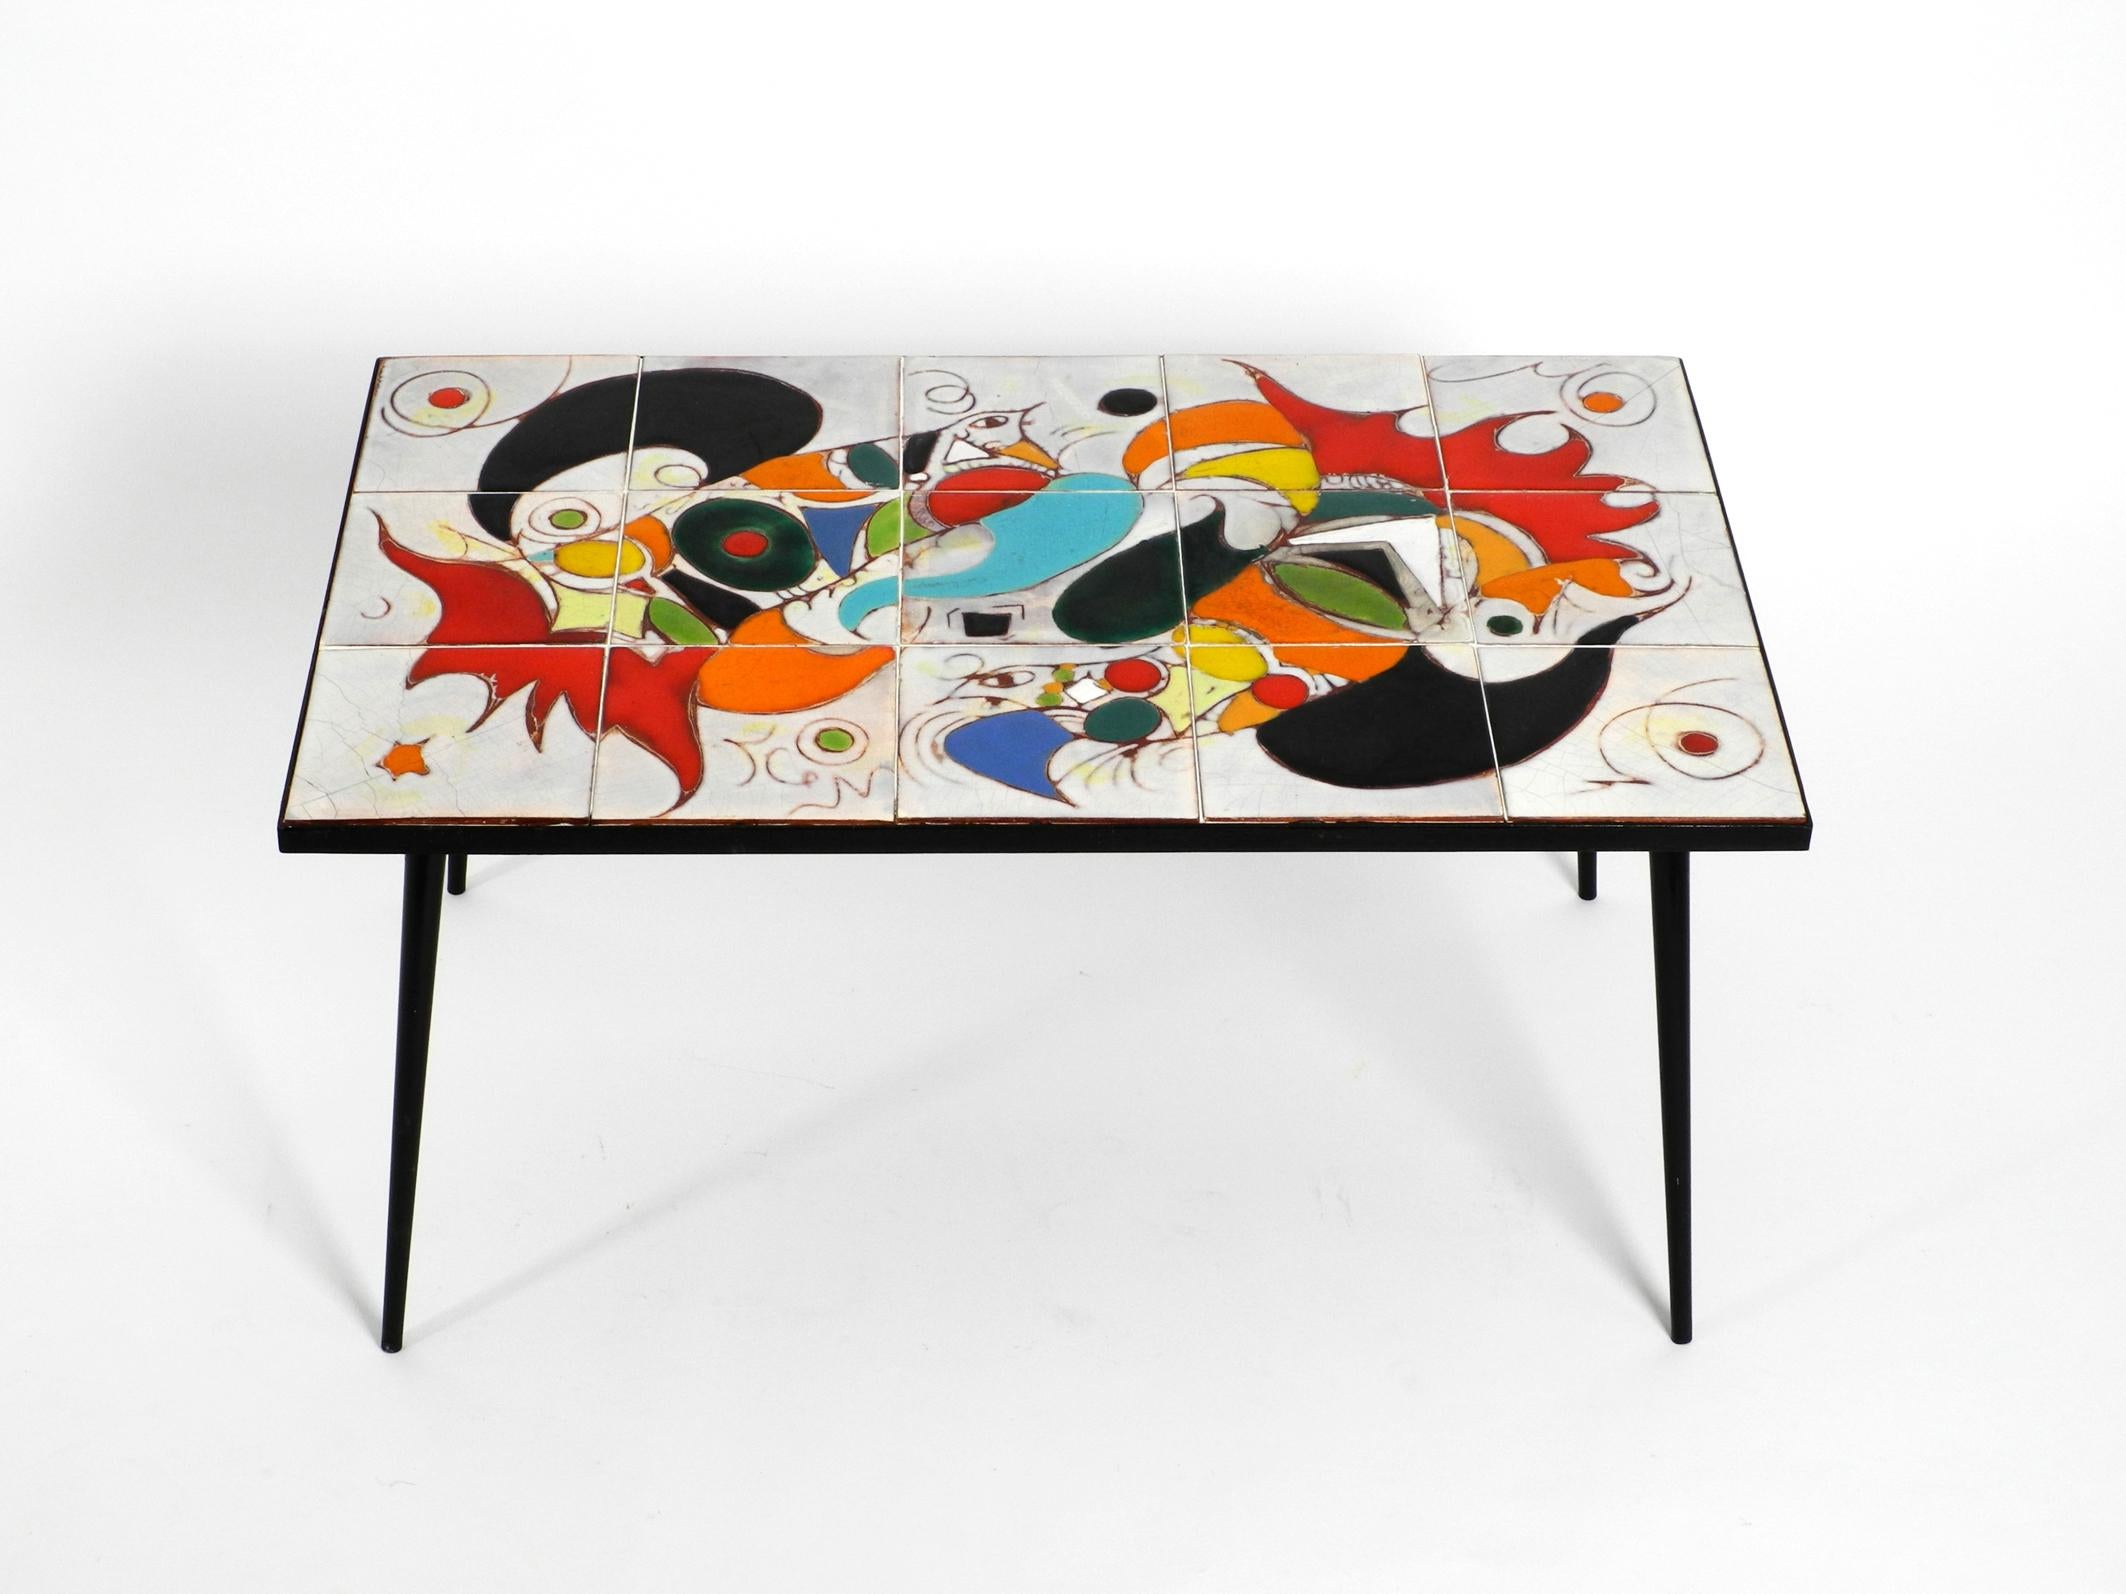 Midcentury Italian Modern Iron Table with Tiled Top and Abstract Motif For Sale 5